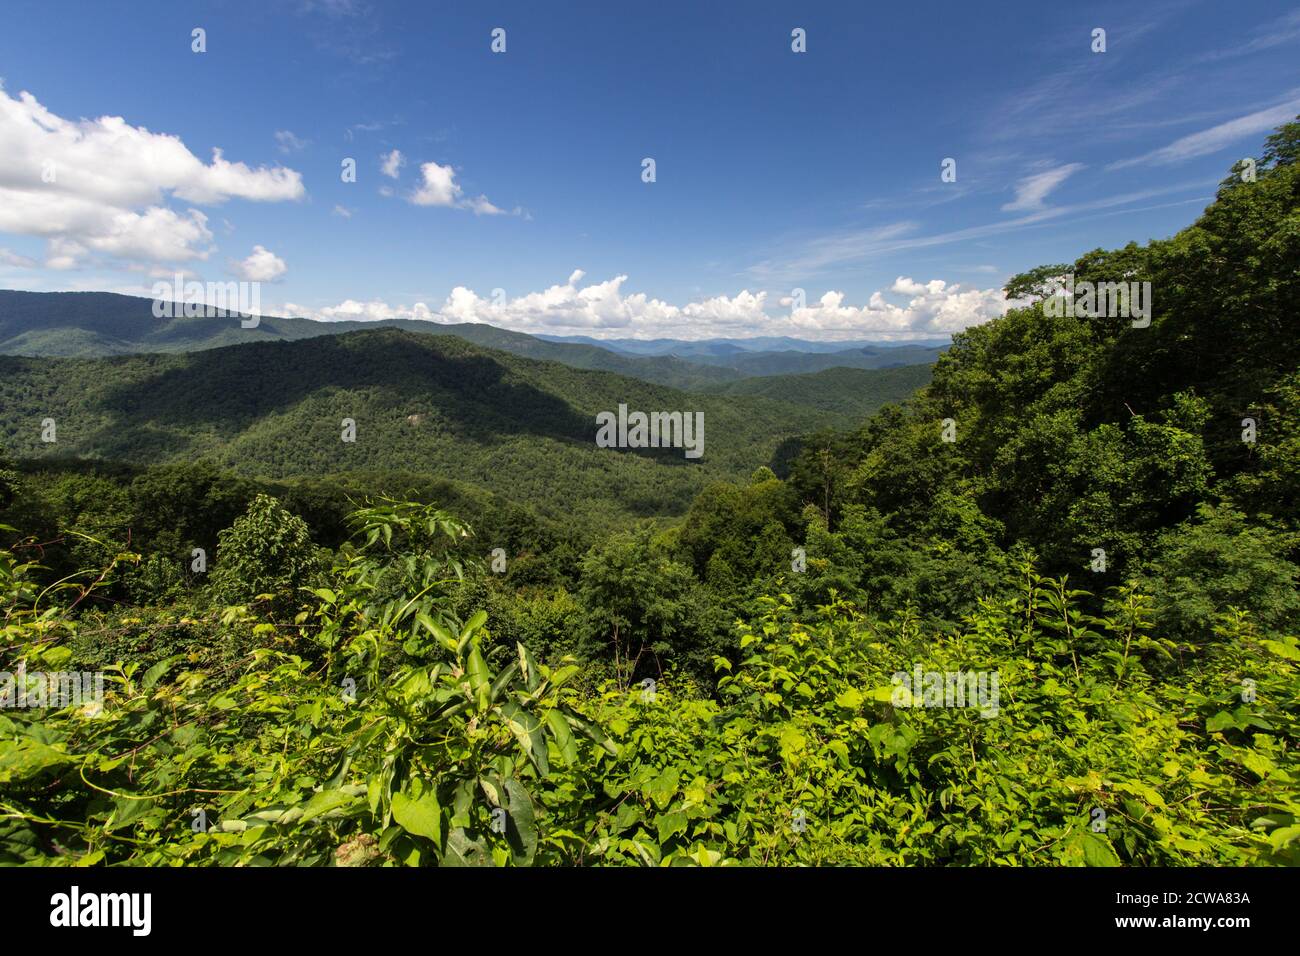 Scenic Appalachian Mountain overlook on the Foothills Parkway in the Great Smoky Mountains National Park of Tennessee. Stock Photo